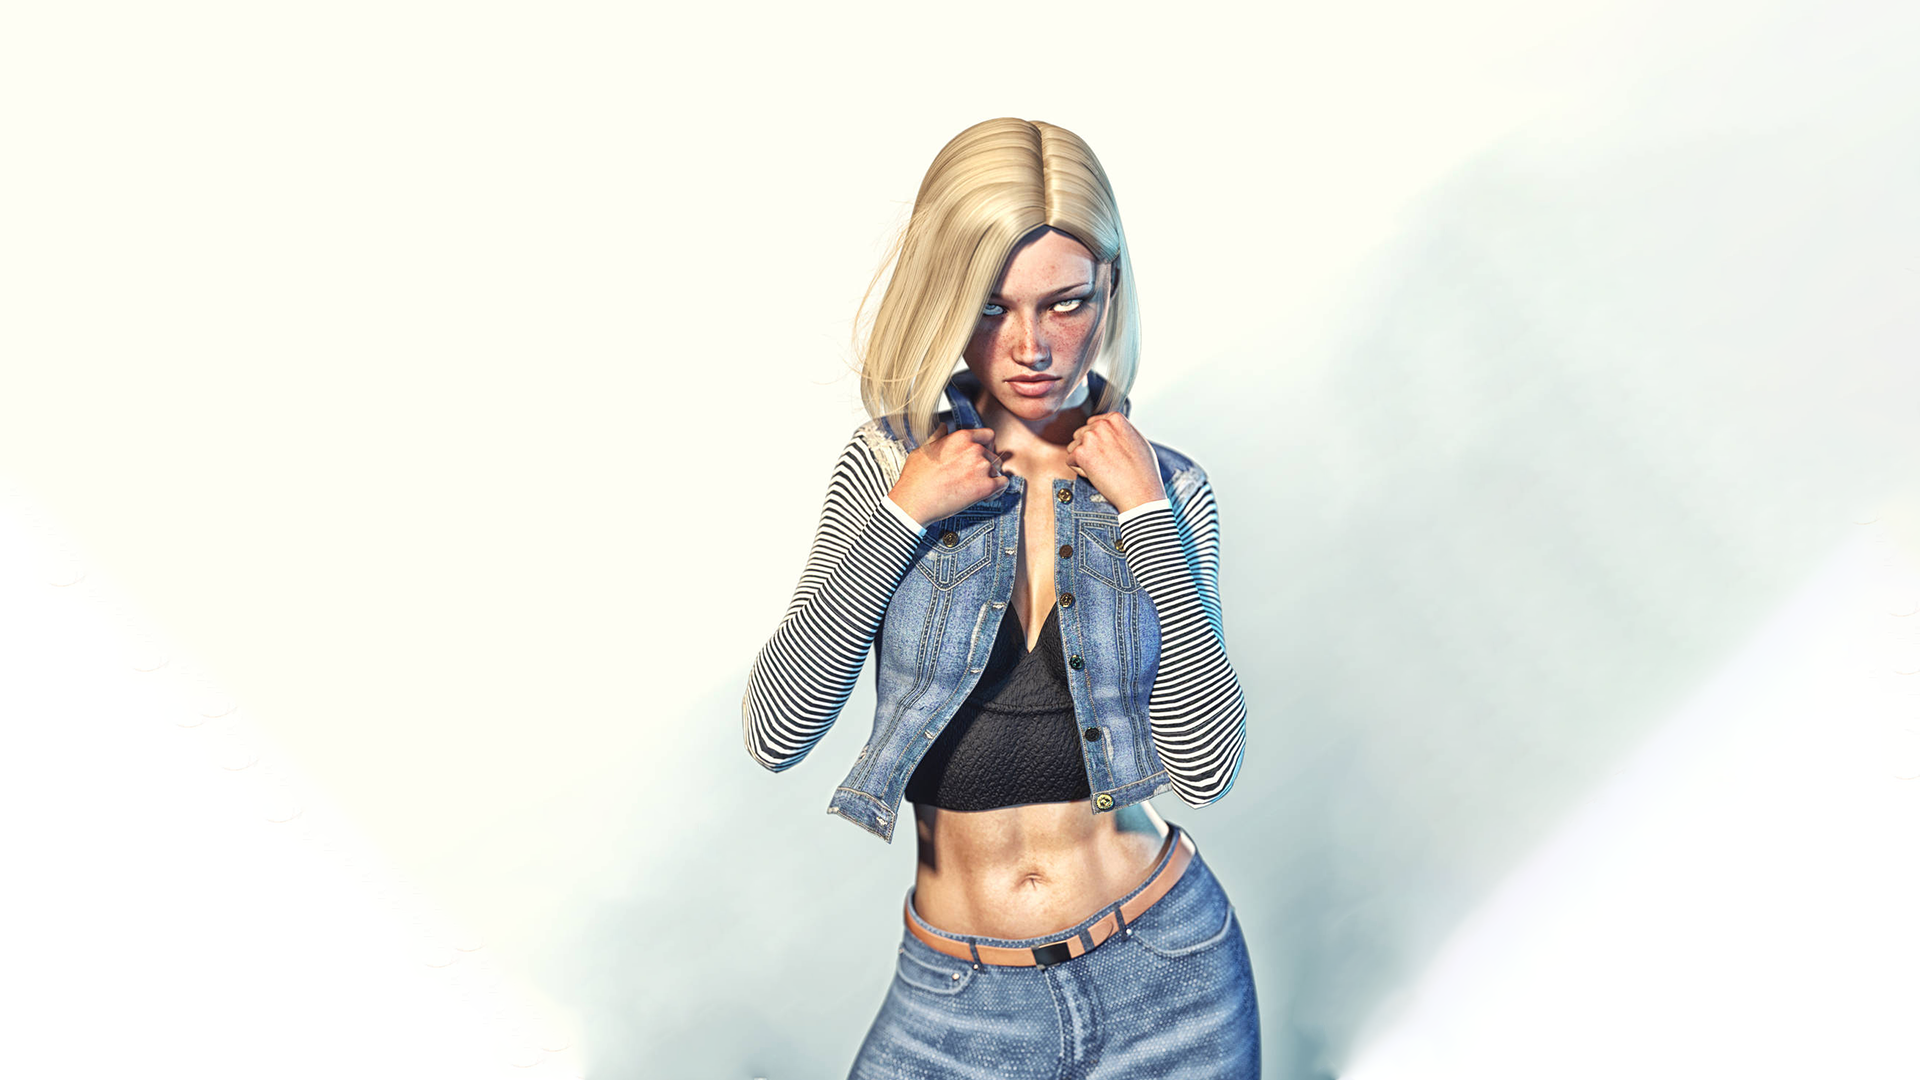 Android 18 by mortze